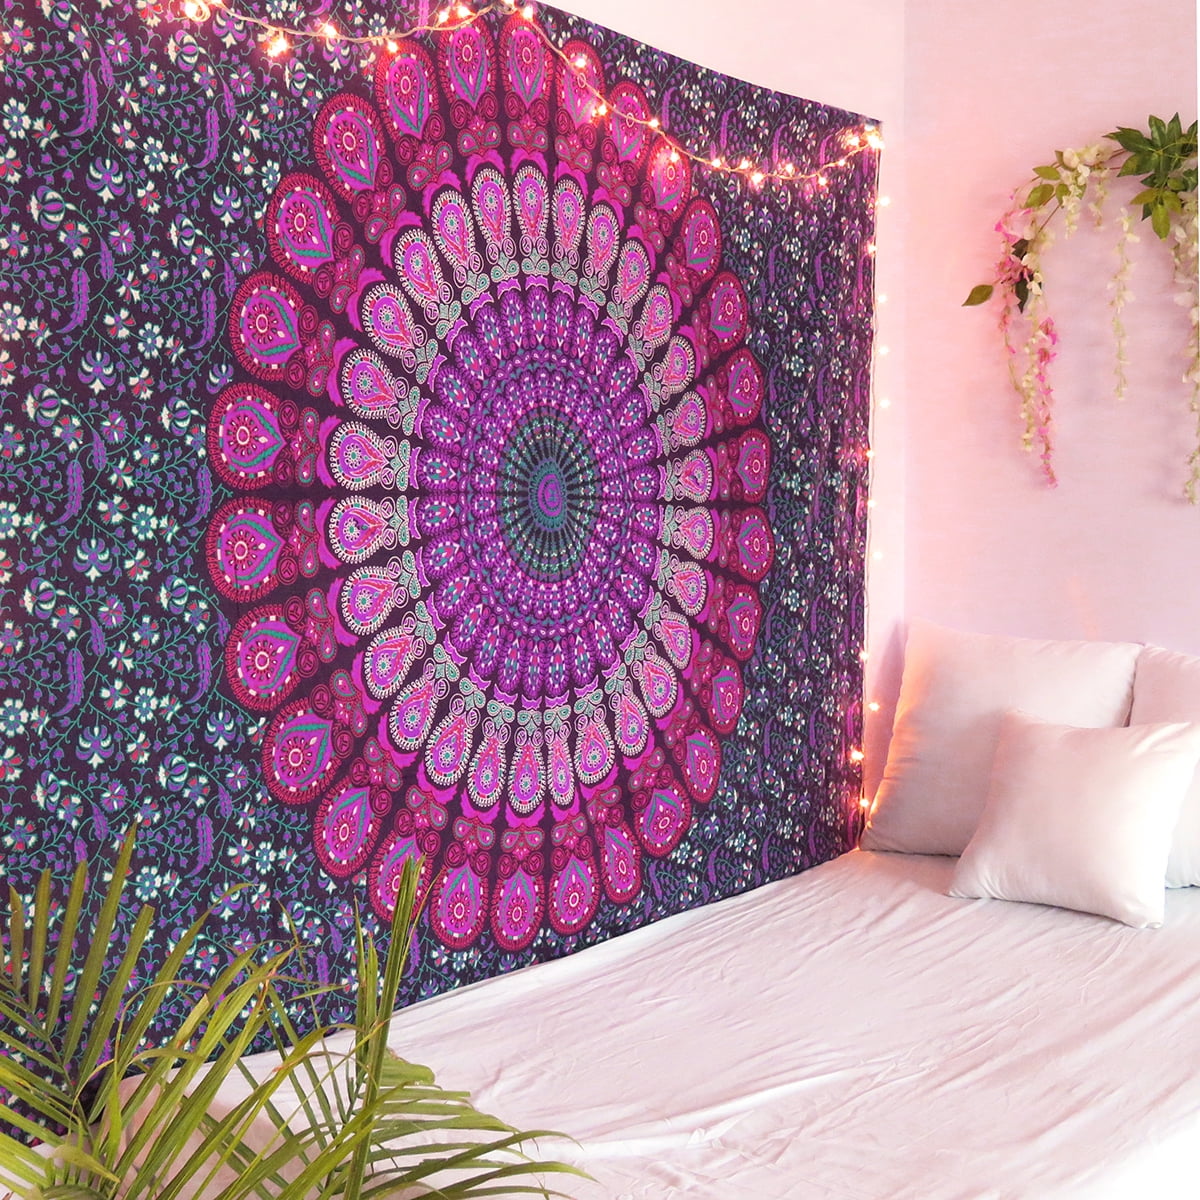 Indian Cotton Bedspread Mandala Tapestry Tye Dye Bed Cover Room Decor 